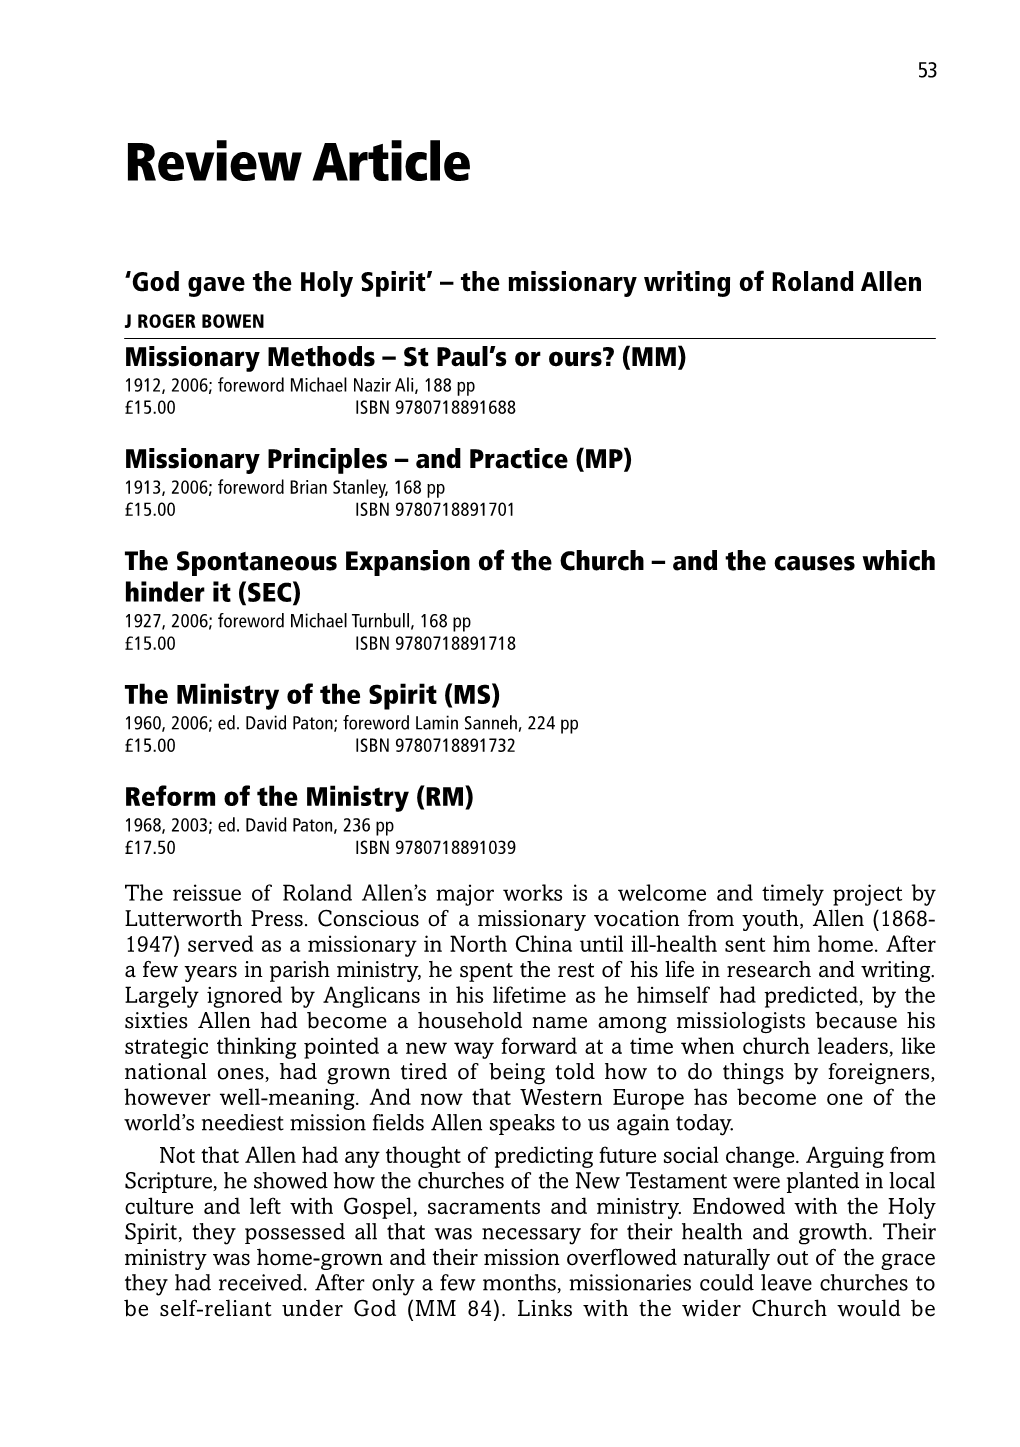 Review Article: 'God Gave the Holy Spirit'